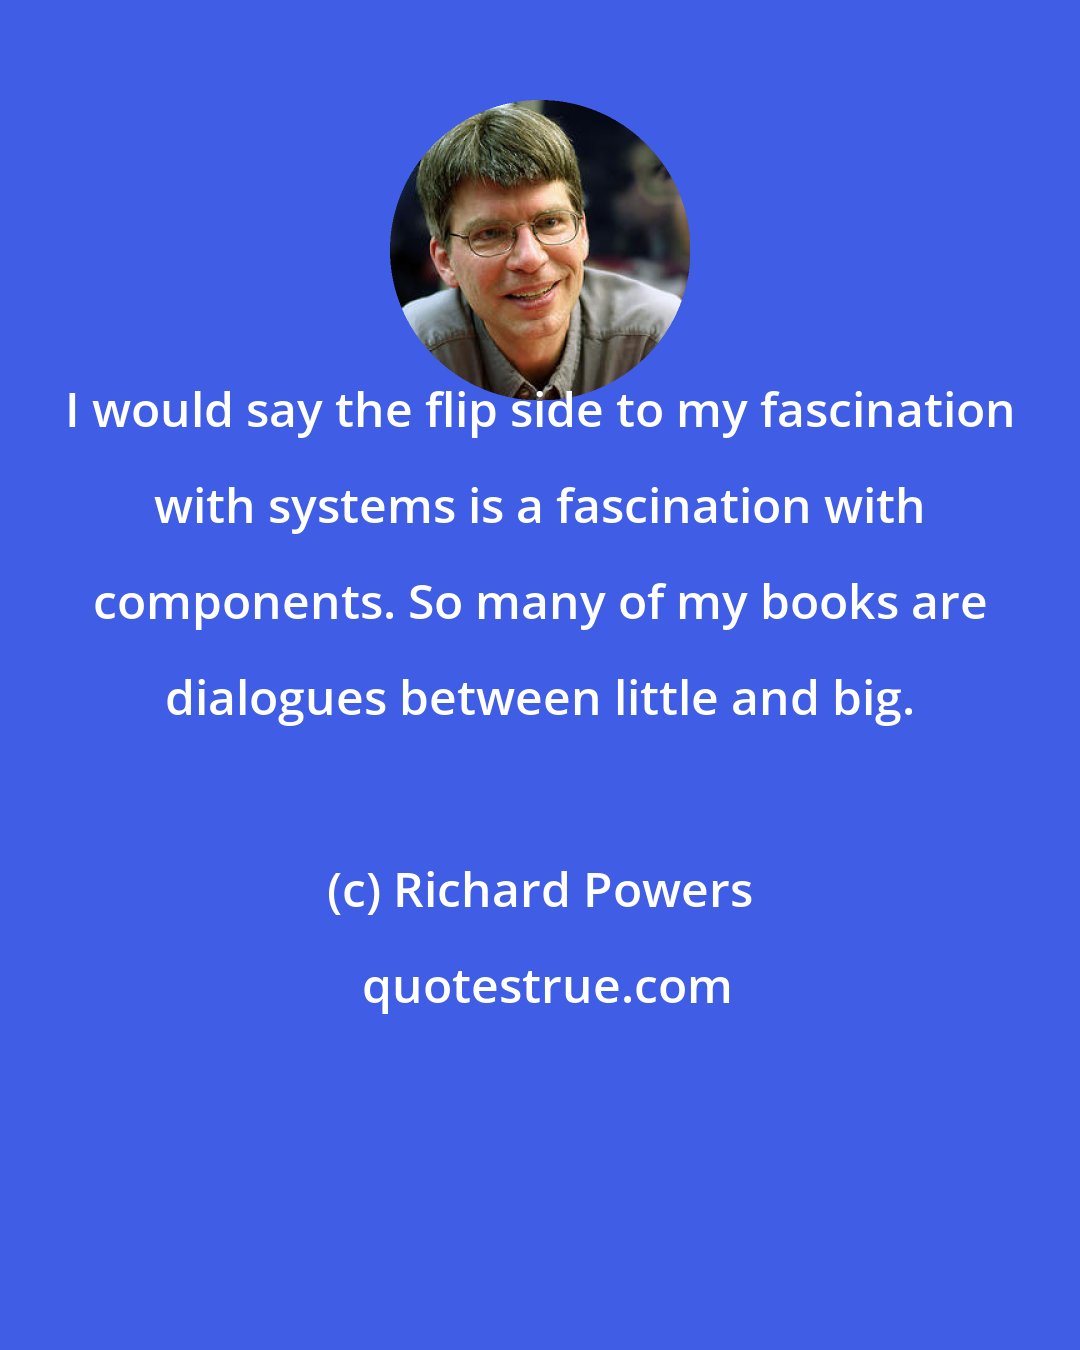 Richard Powers: I would say the flip side to my fascination with systems is a fascination with components. So many of my books are dialogues between little and big.